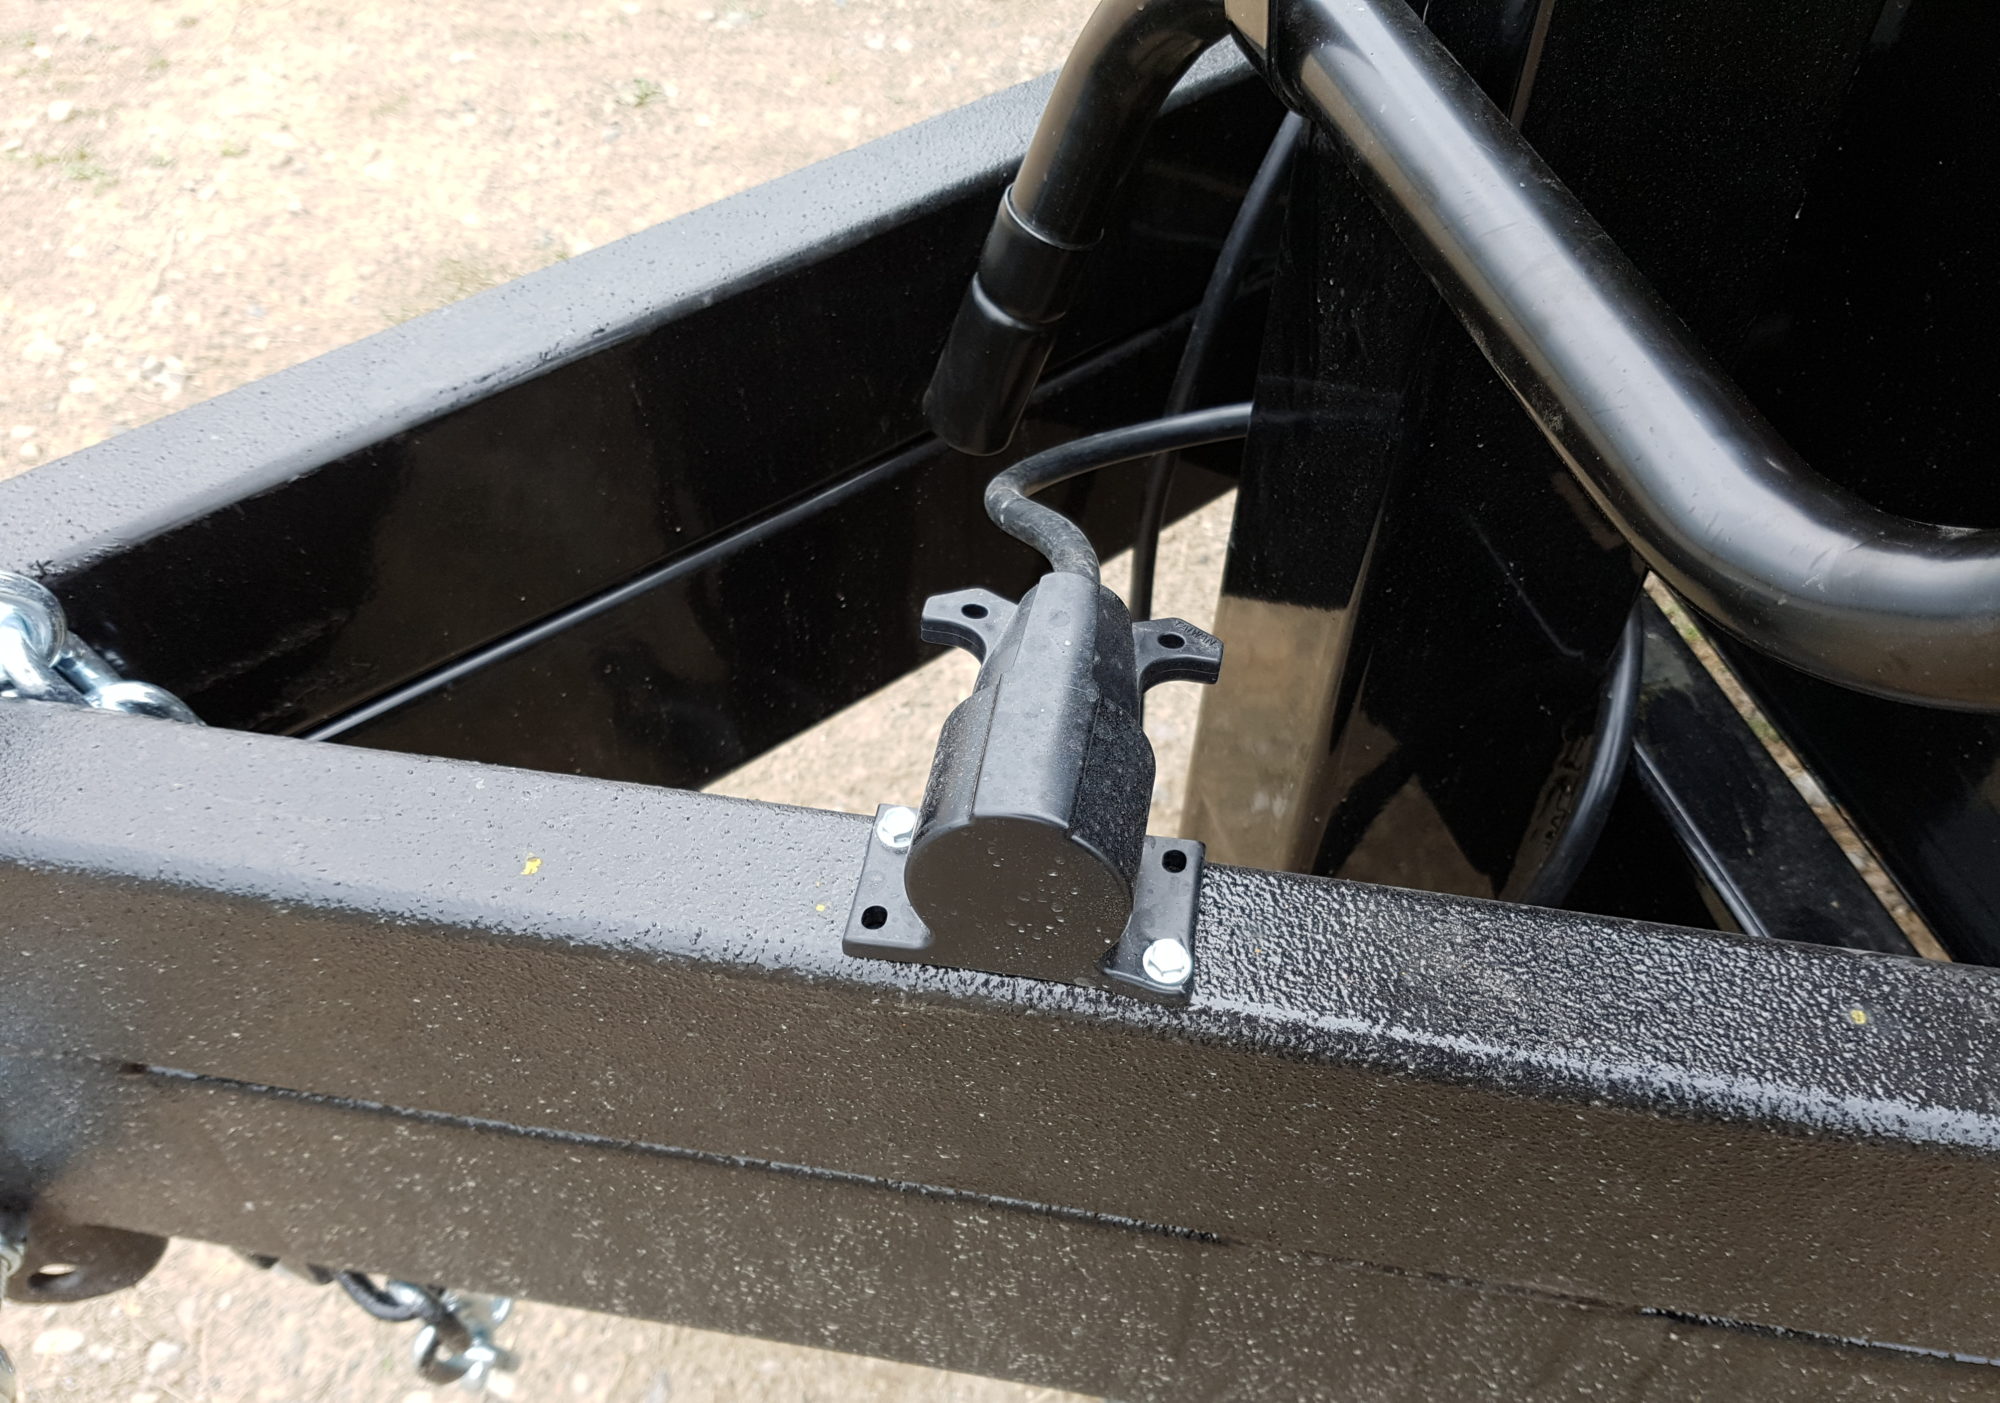 Connect-to-Protect 7Way mounted on trailer frame